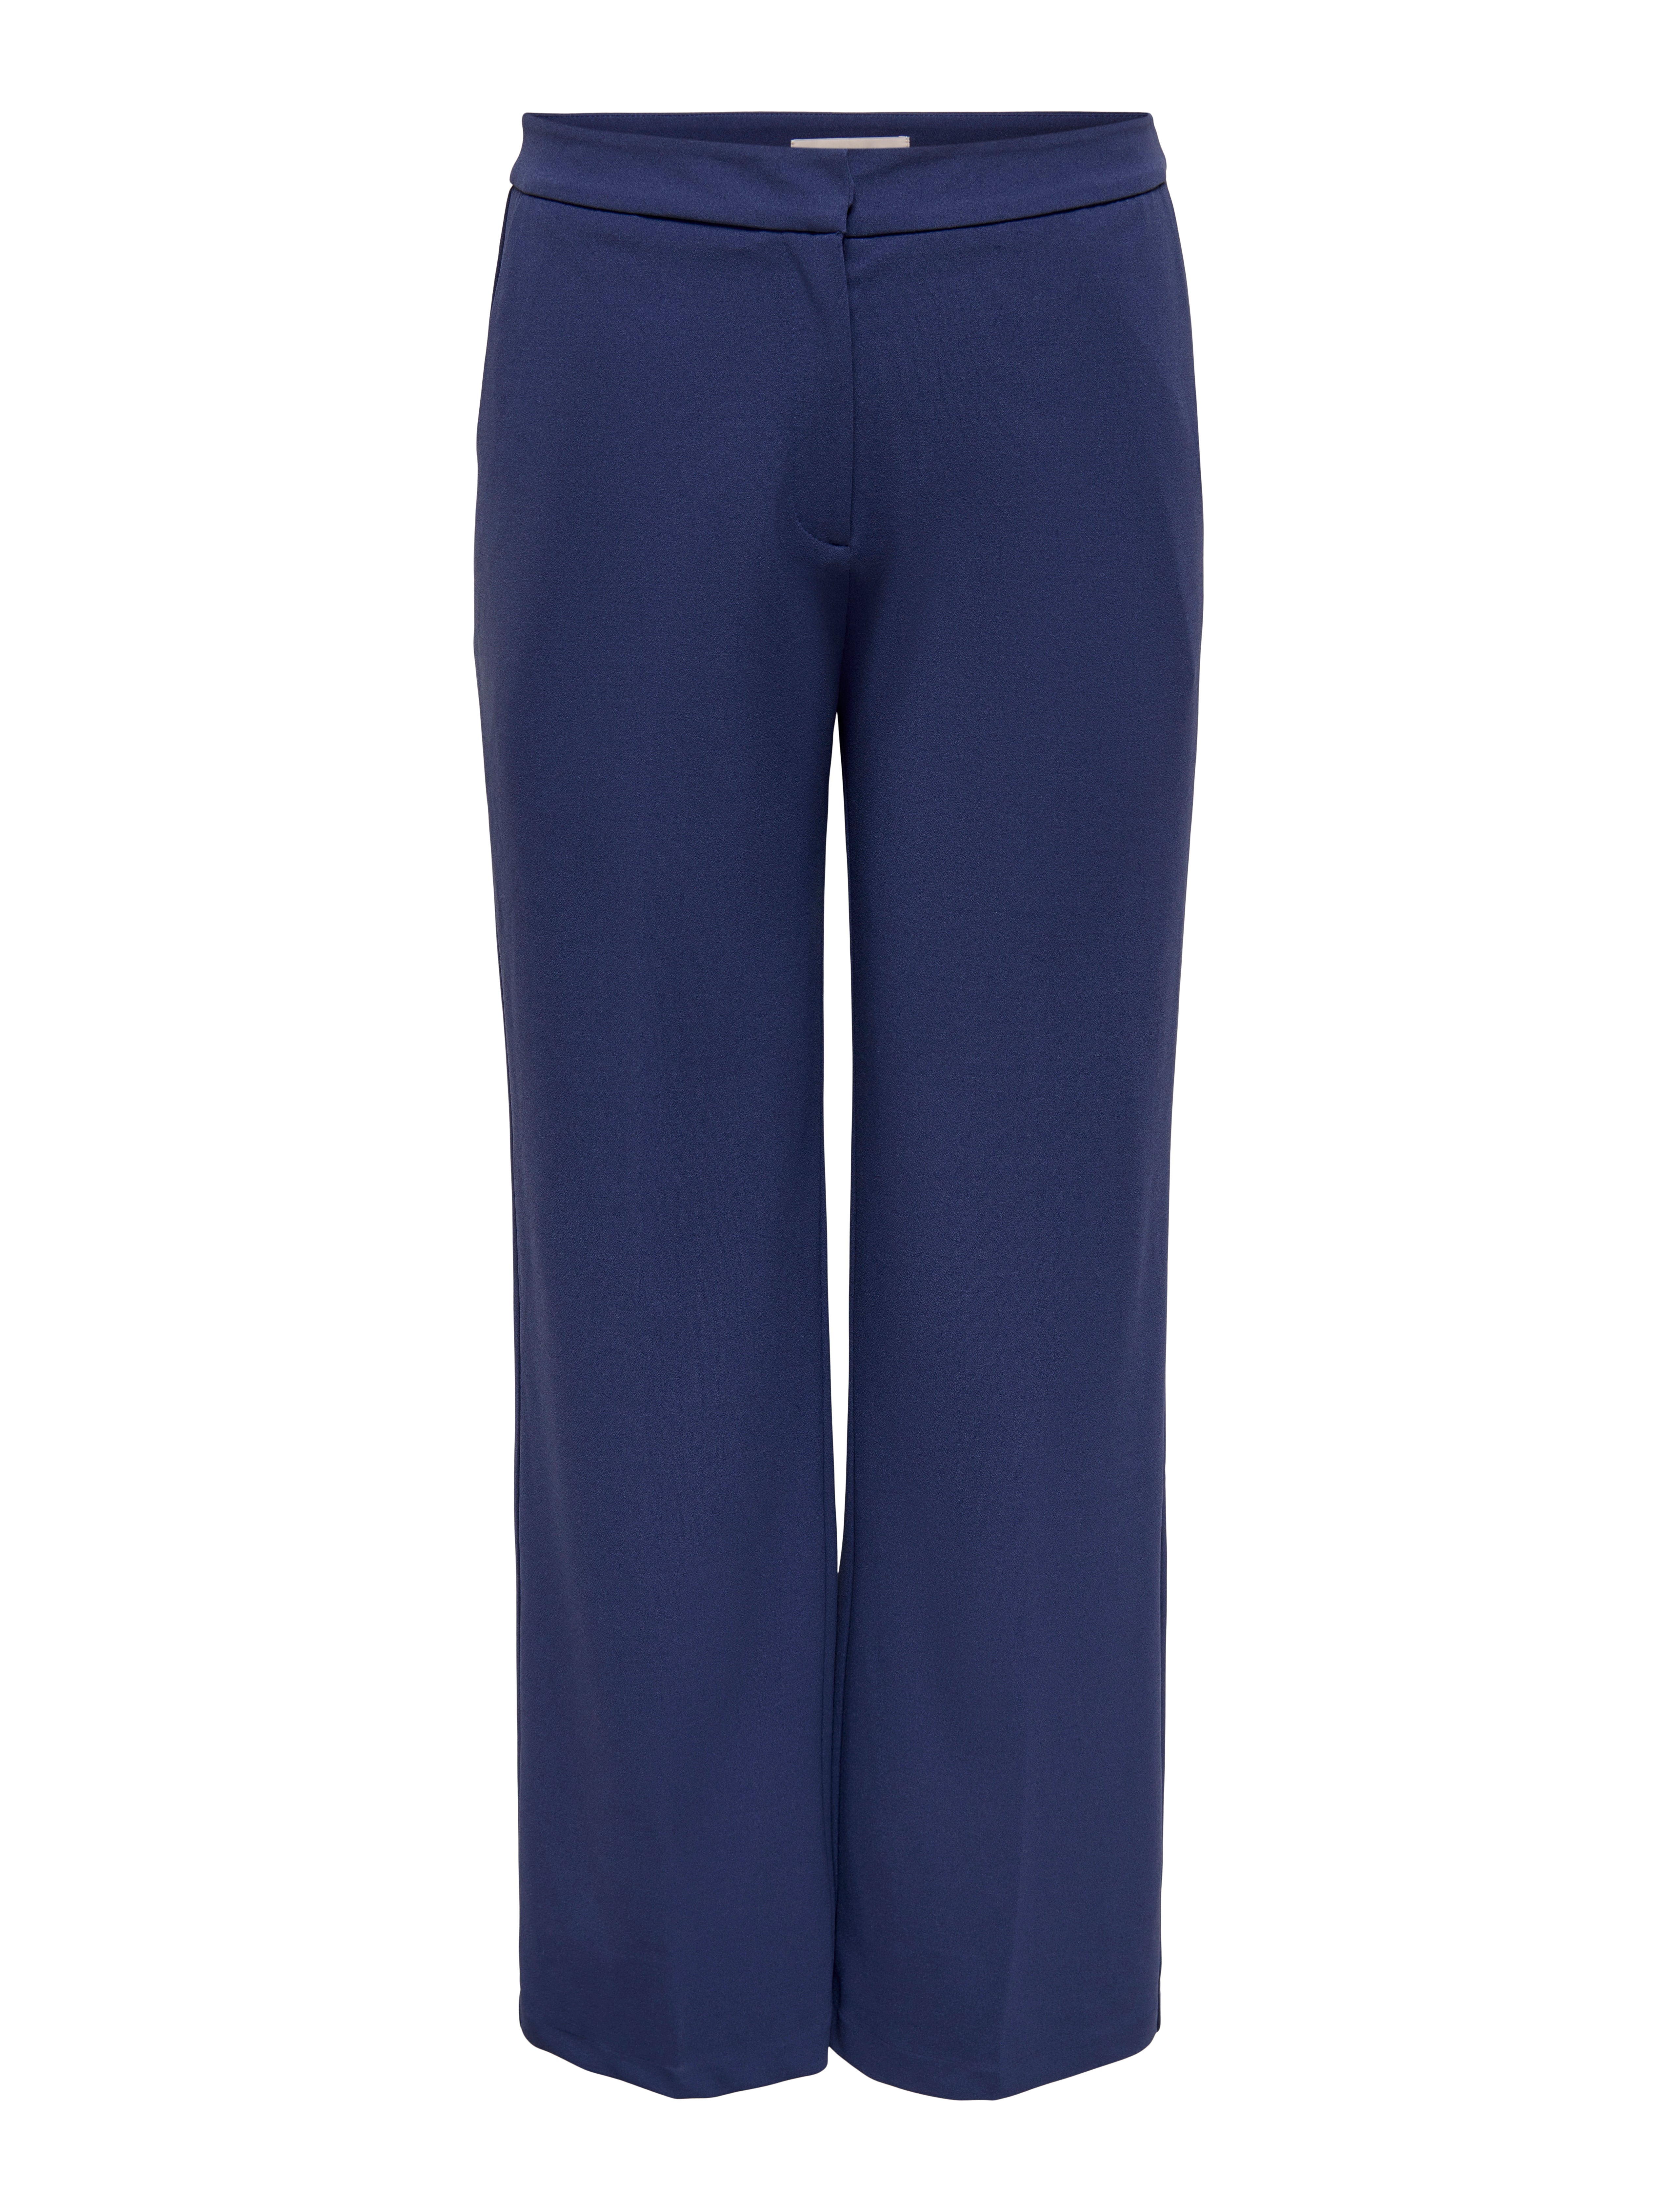 Curvy highwaisted Trousers scontato del 30